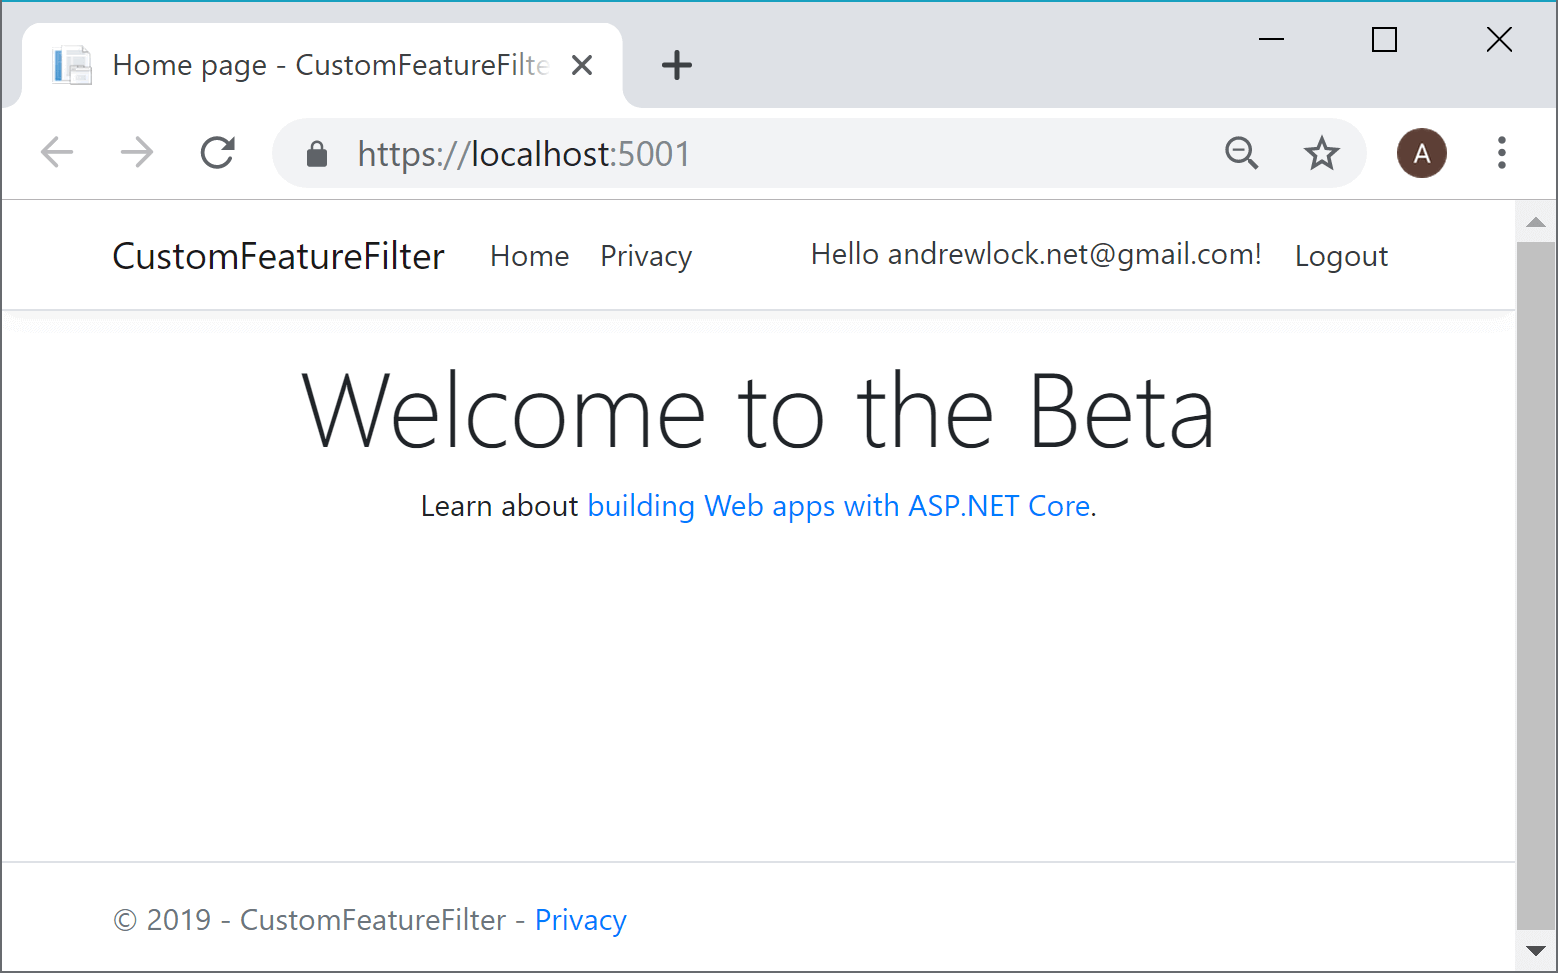 When the feature flag is enabled, the header says Welcome to the Beta